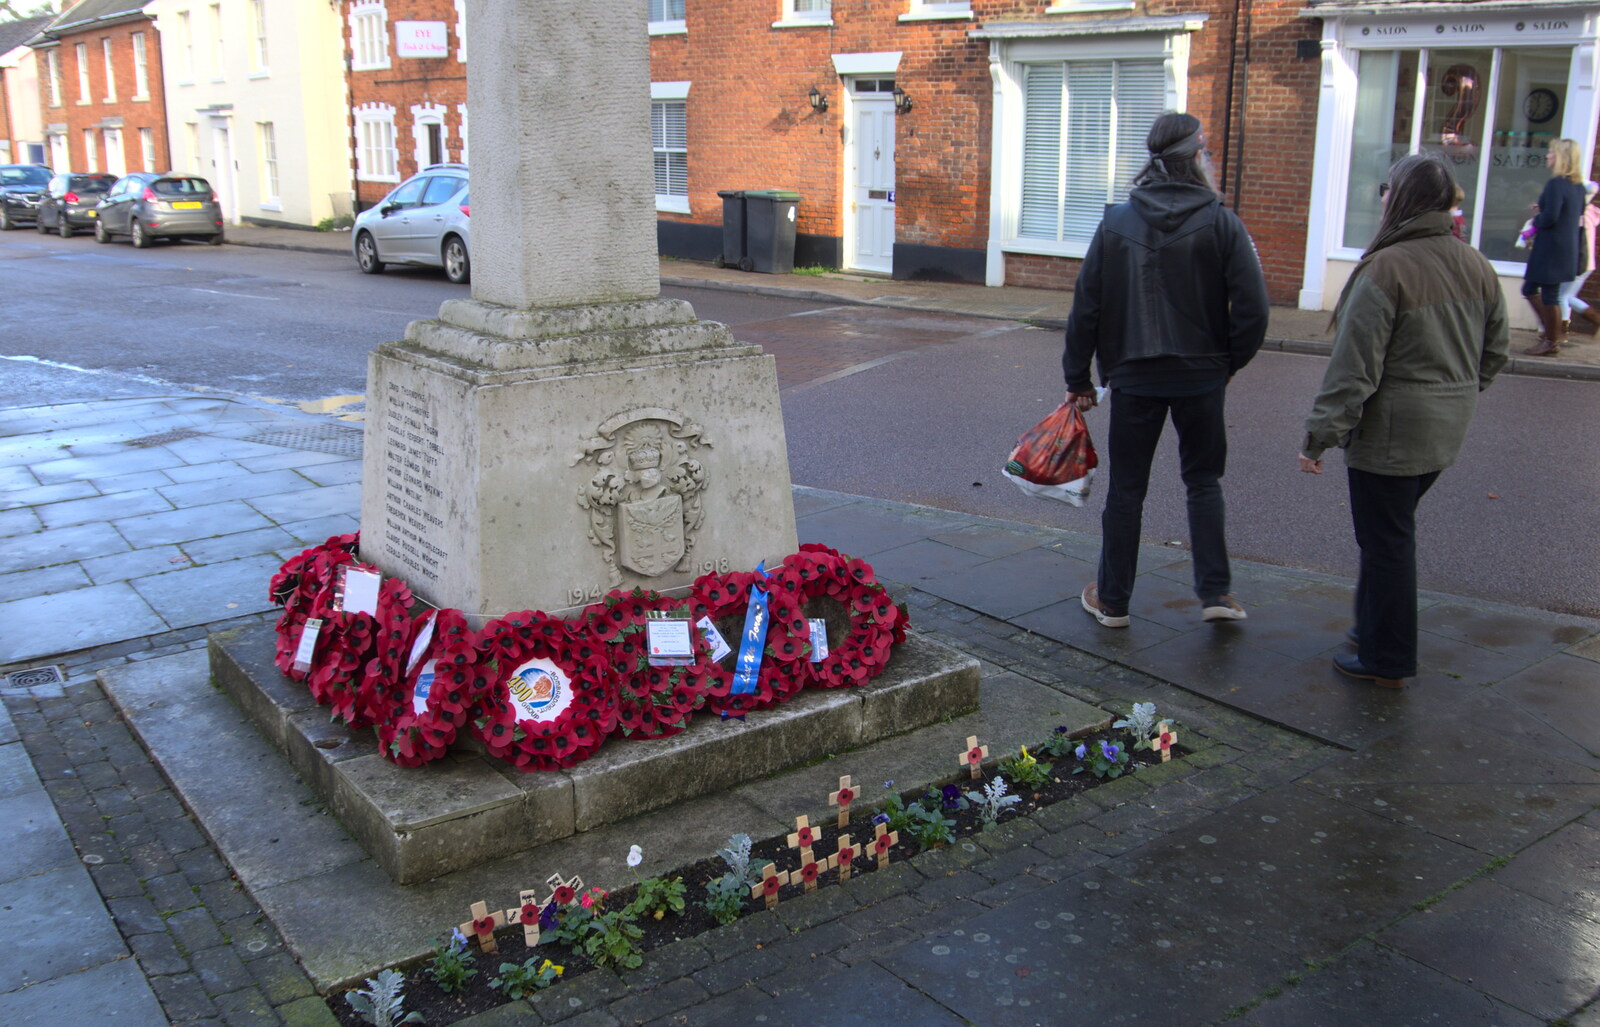 The war memorial from The Remembrance Sunday Parade, Eye, Suffolk - 11th November 2018